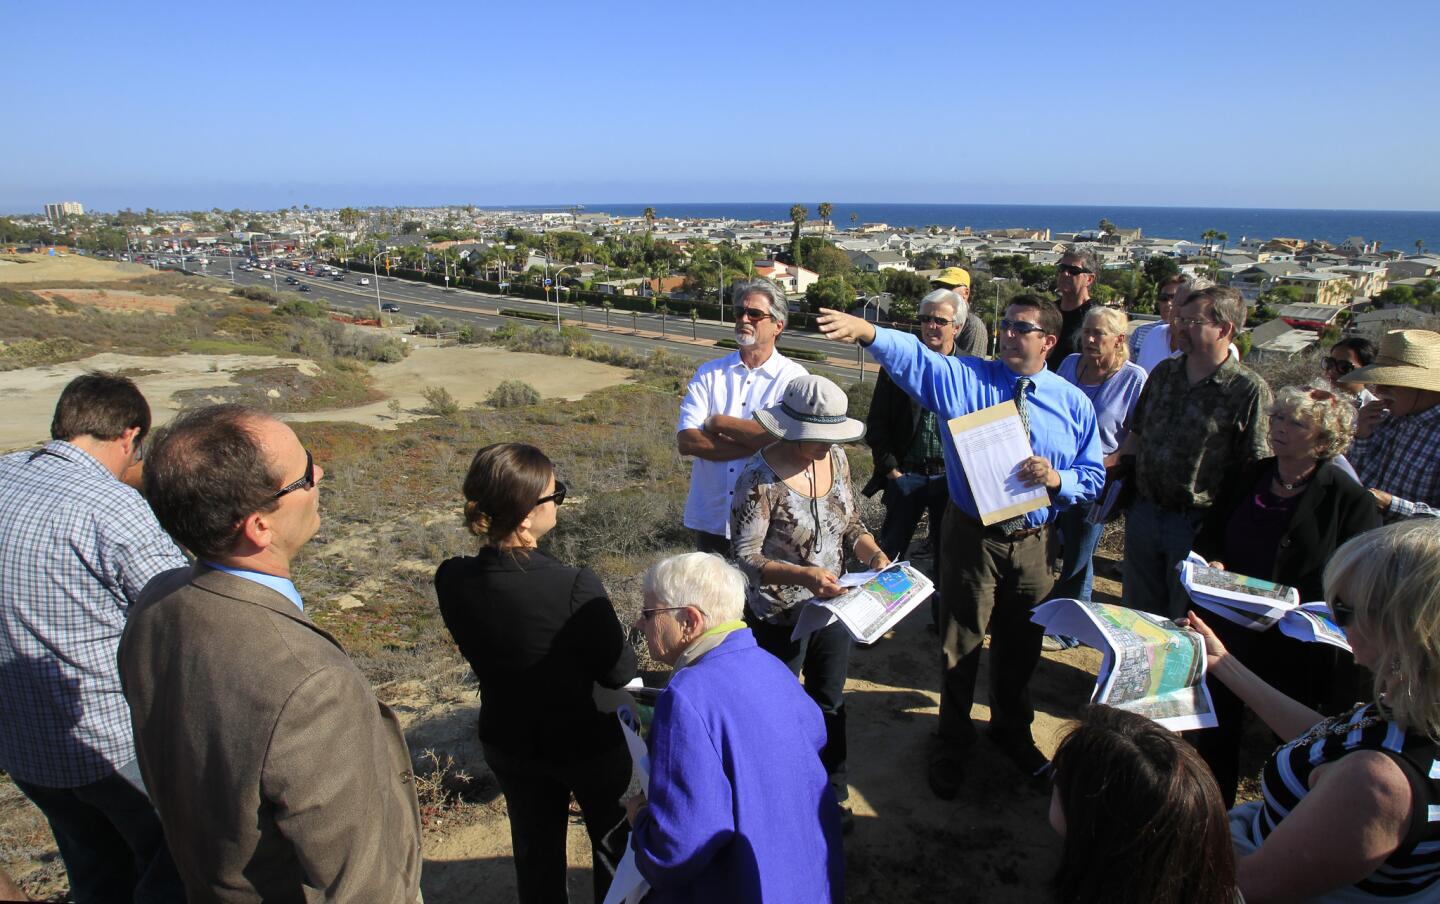 Karl Schwing of the California Coastal Commission leads a field trip for coastal commissioners, staff and the general public of a proposed development project at Banning Ranch near Newport Beach.